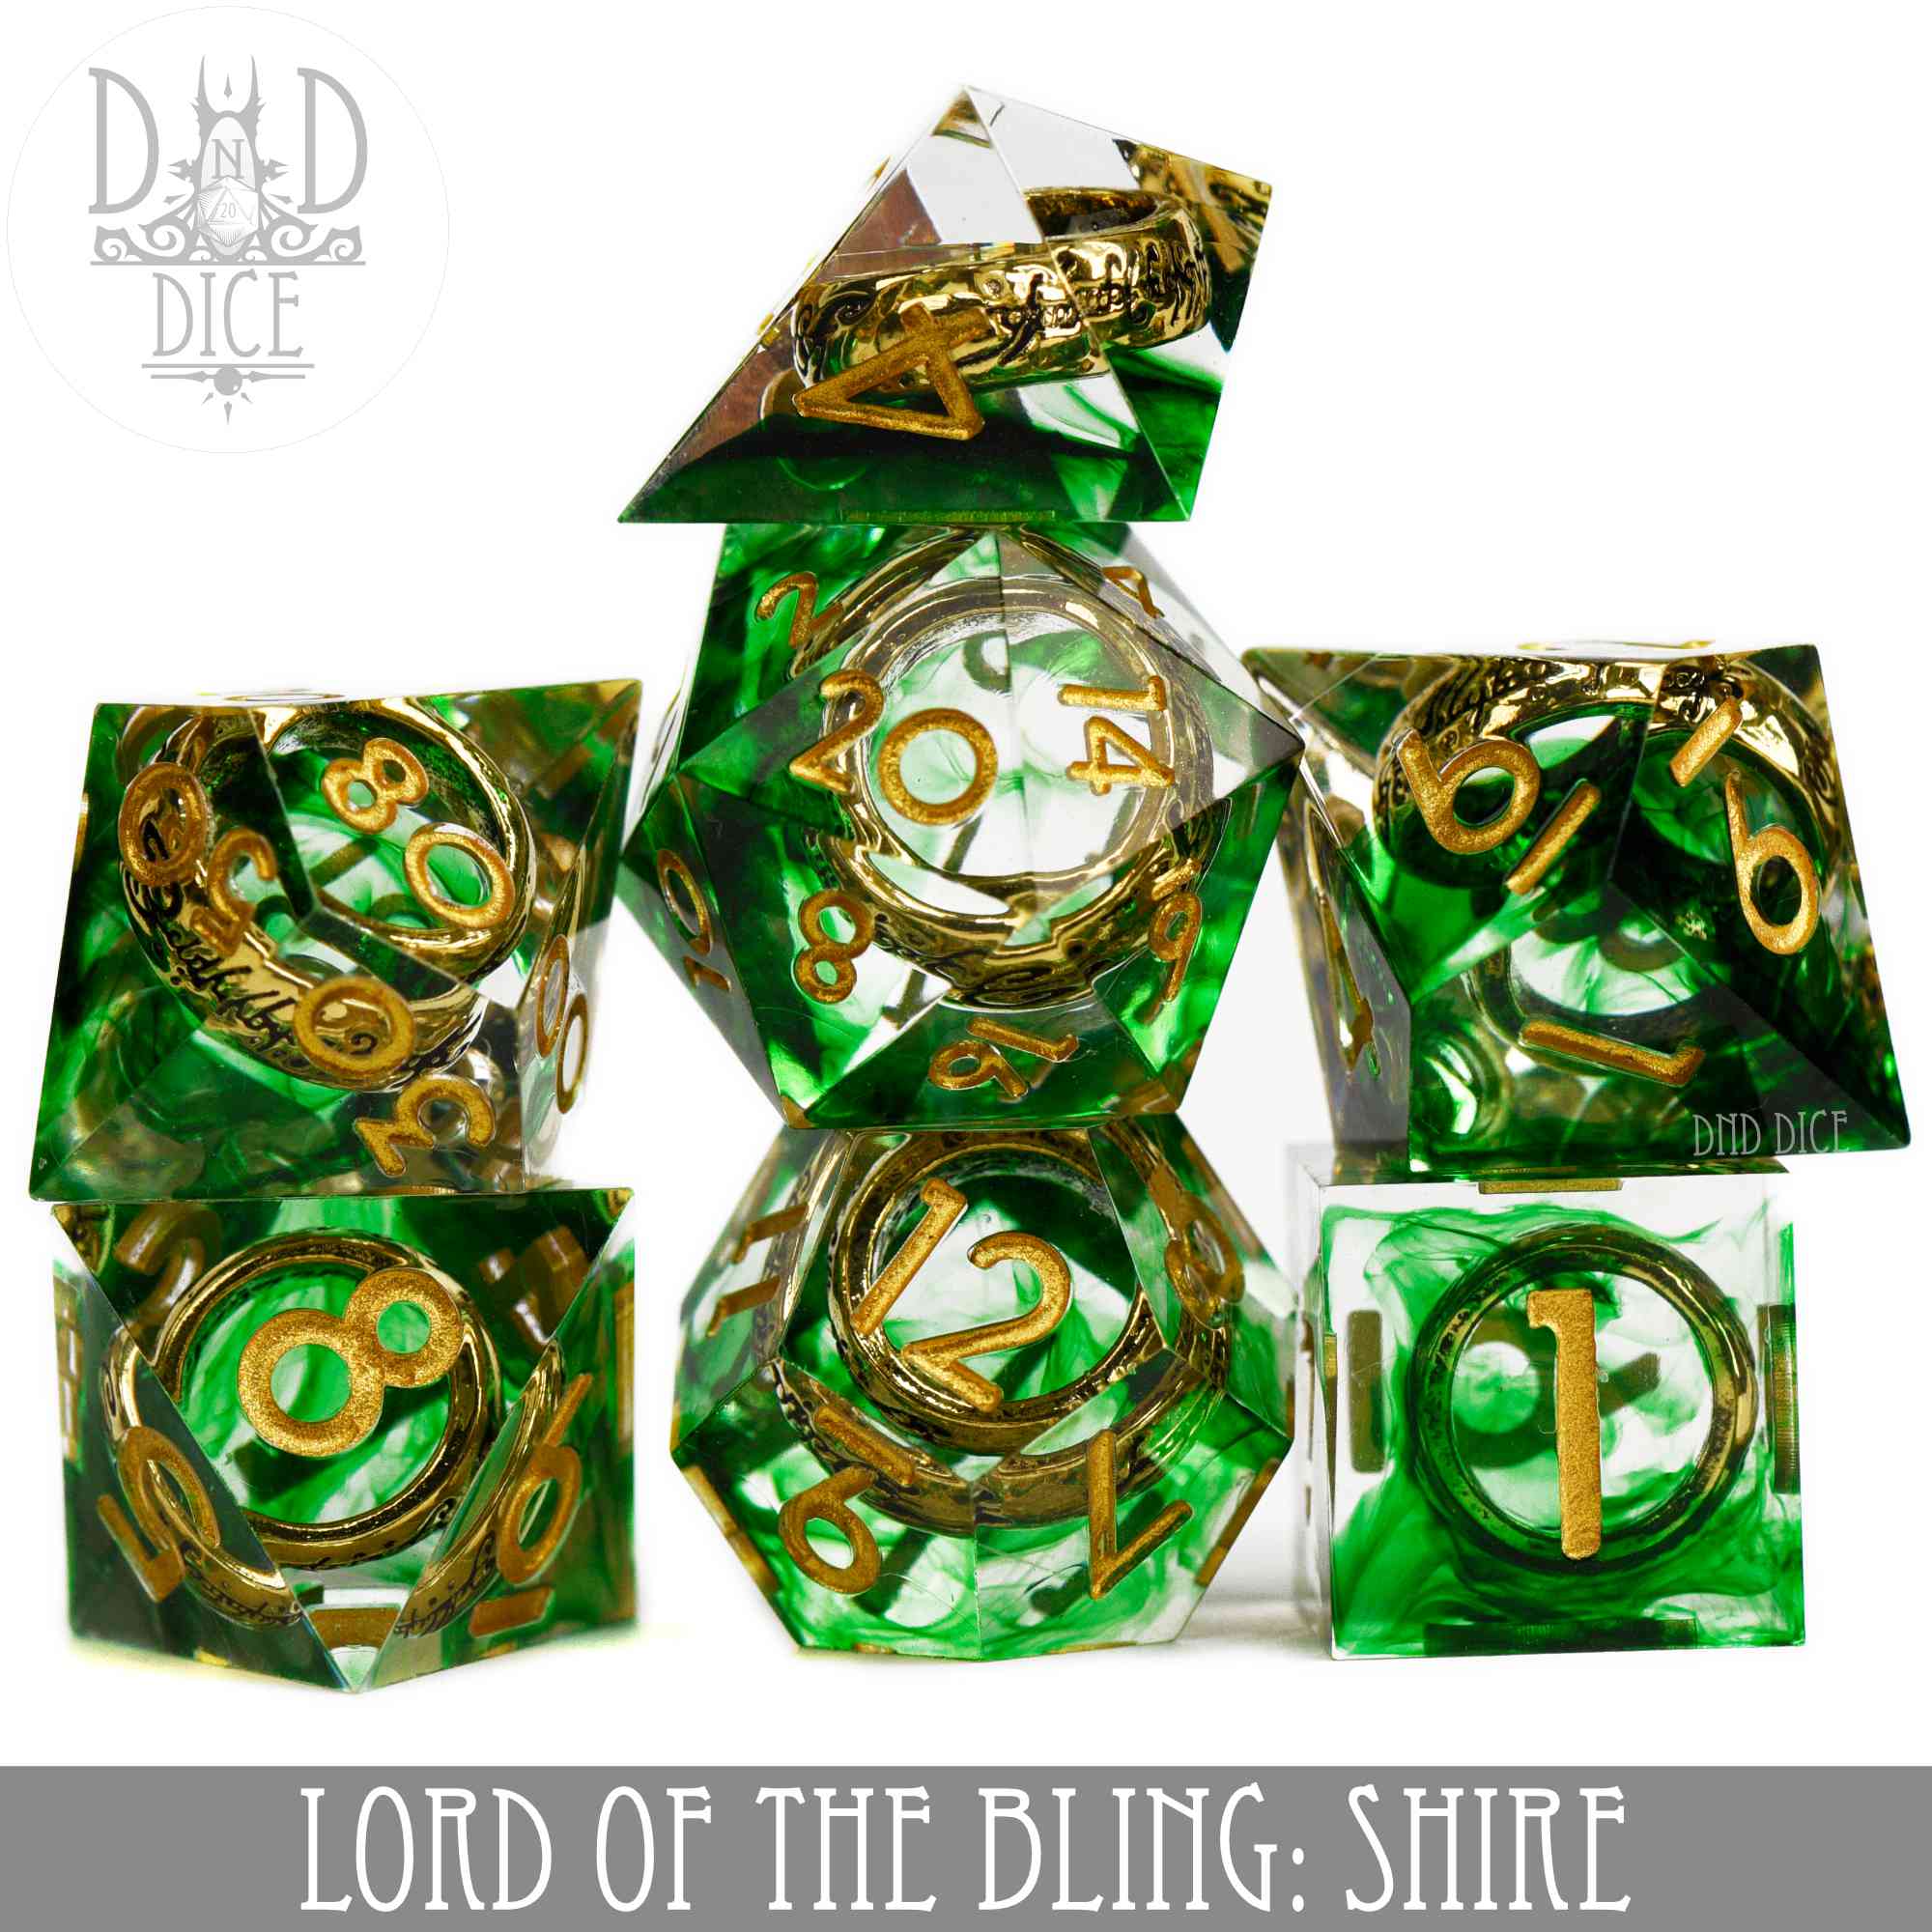 Lord of the Bling: Shire Handmade Dice Set